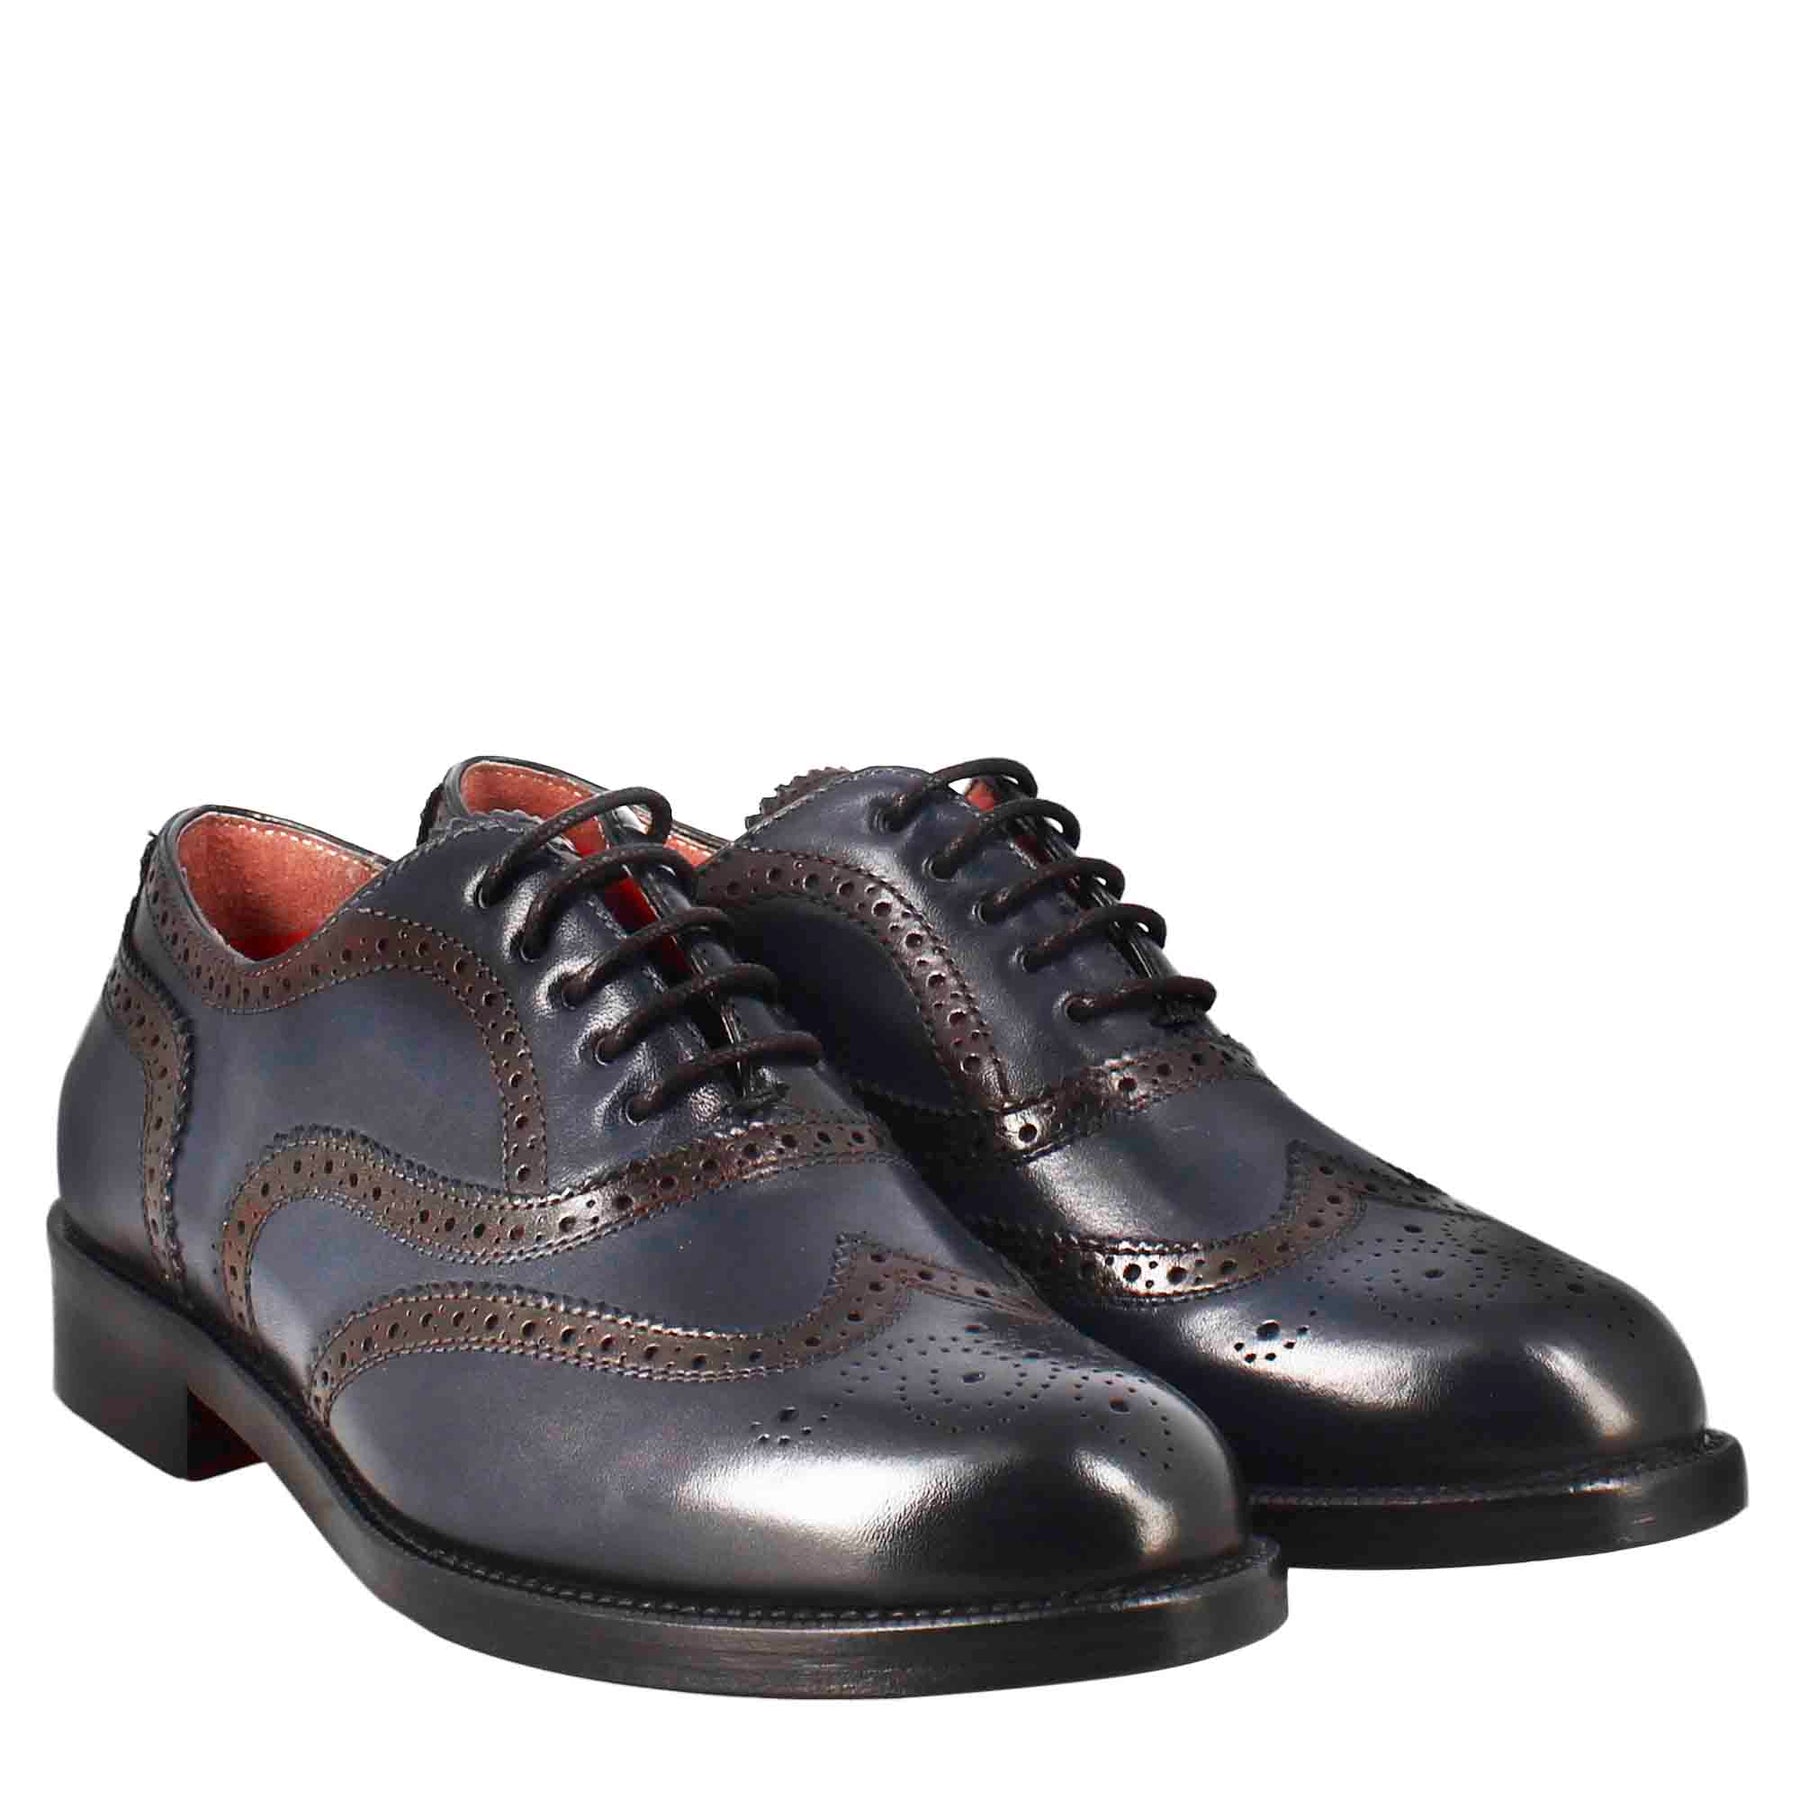 Women's oxfords with brogue effect in blue leather